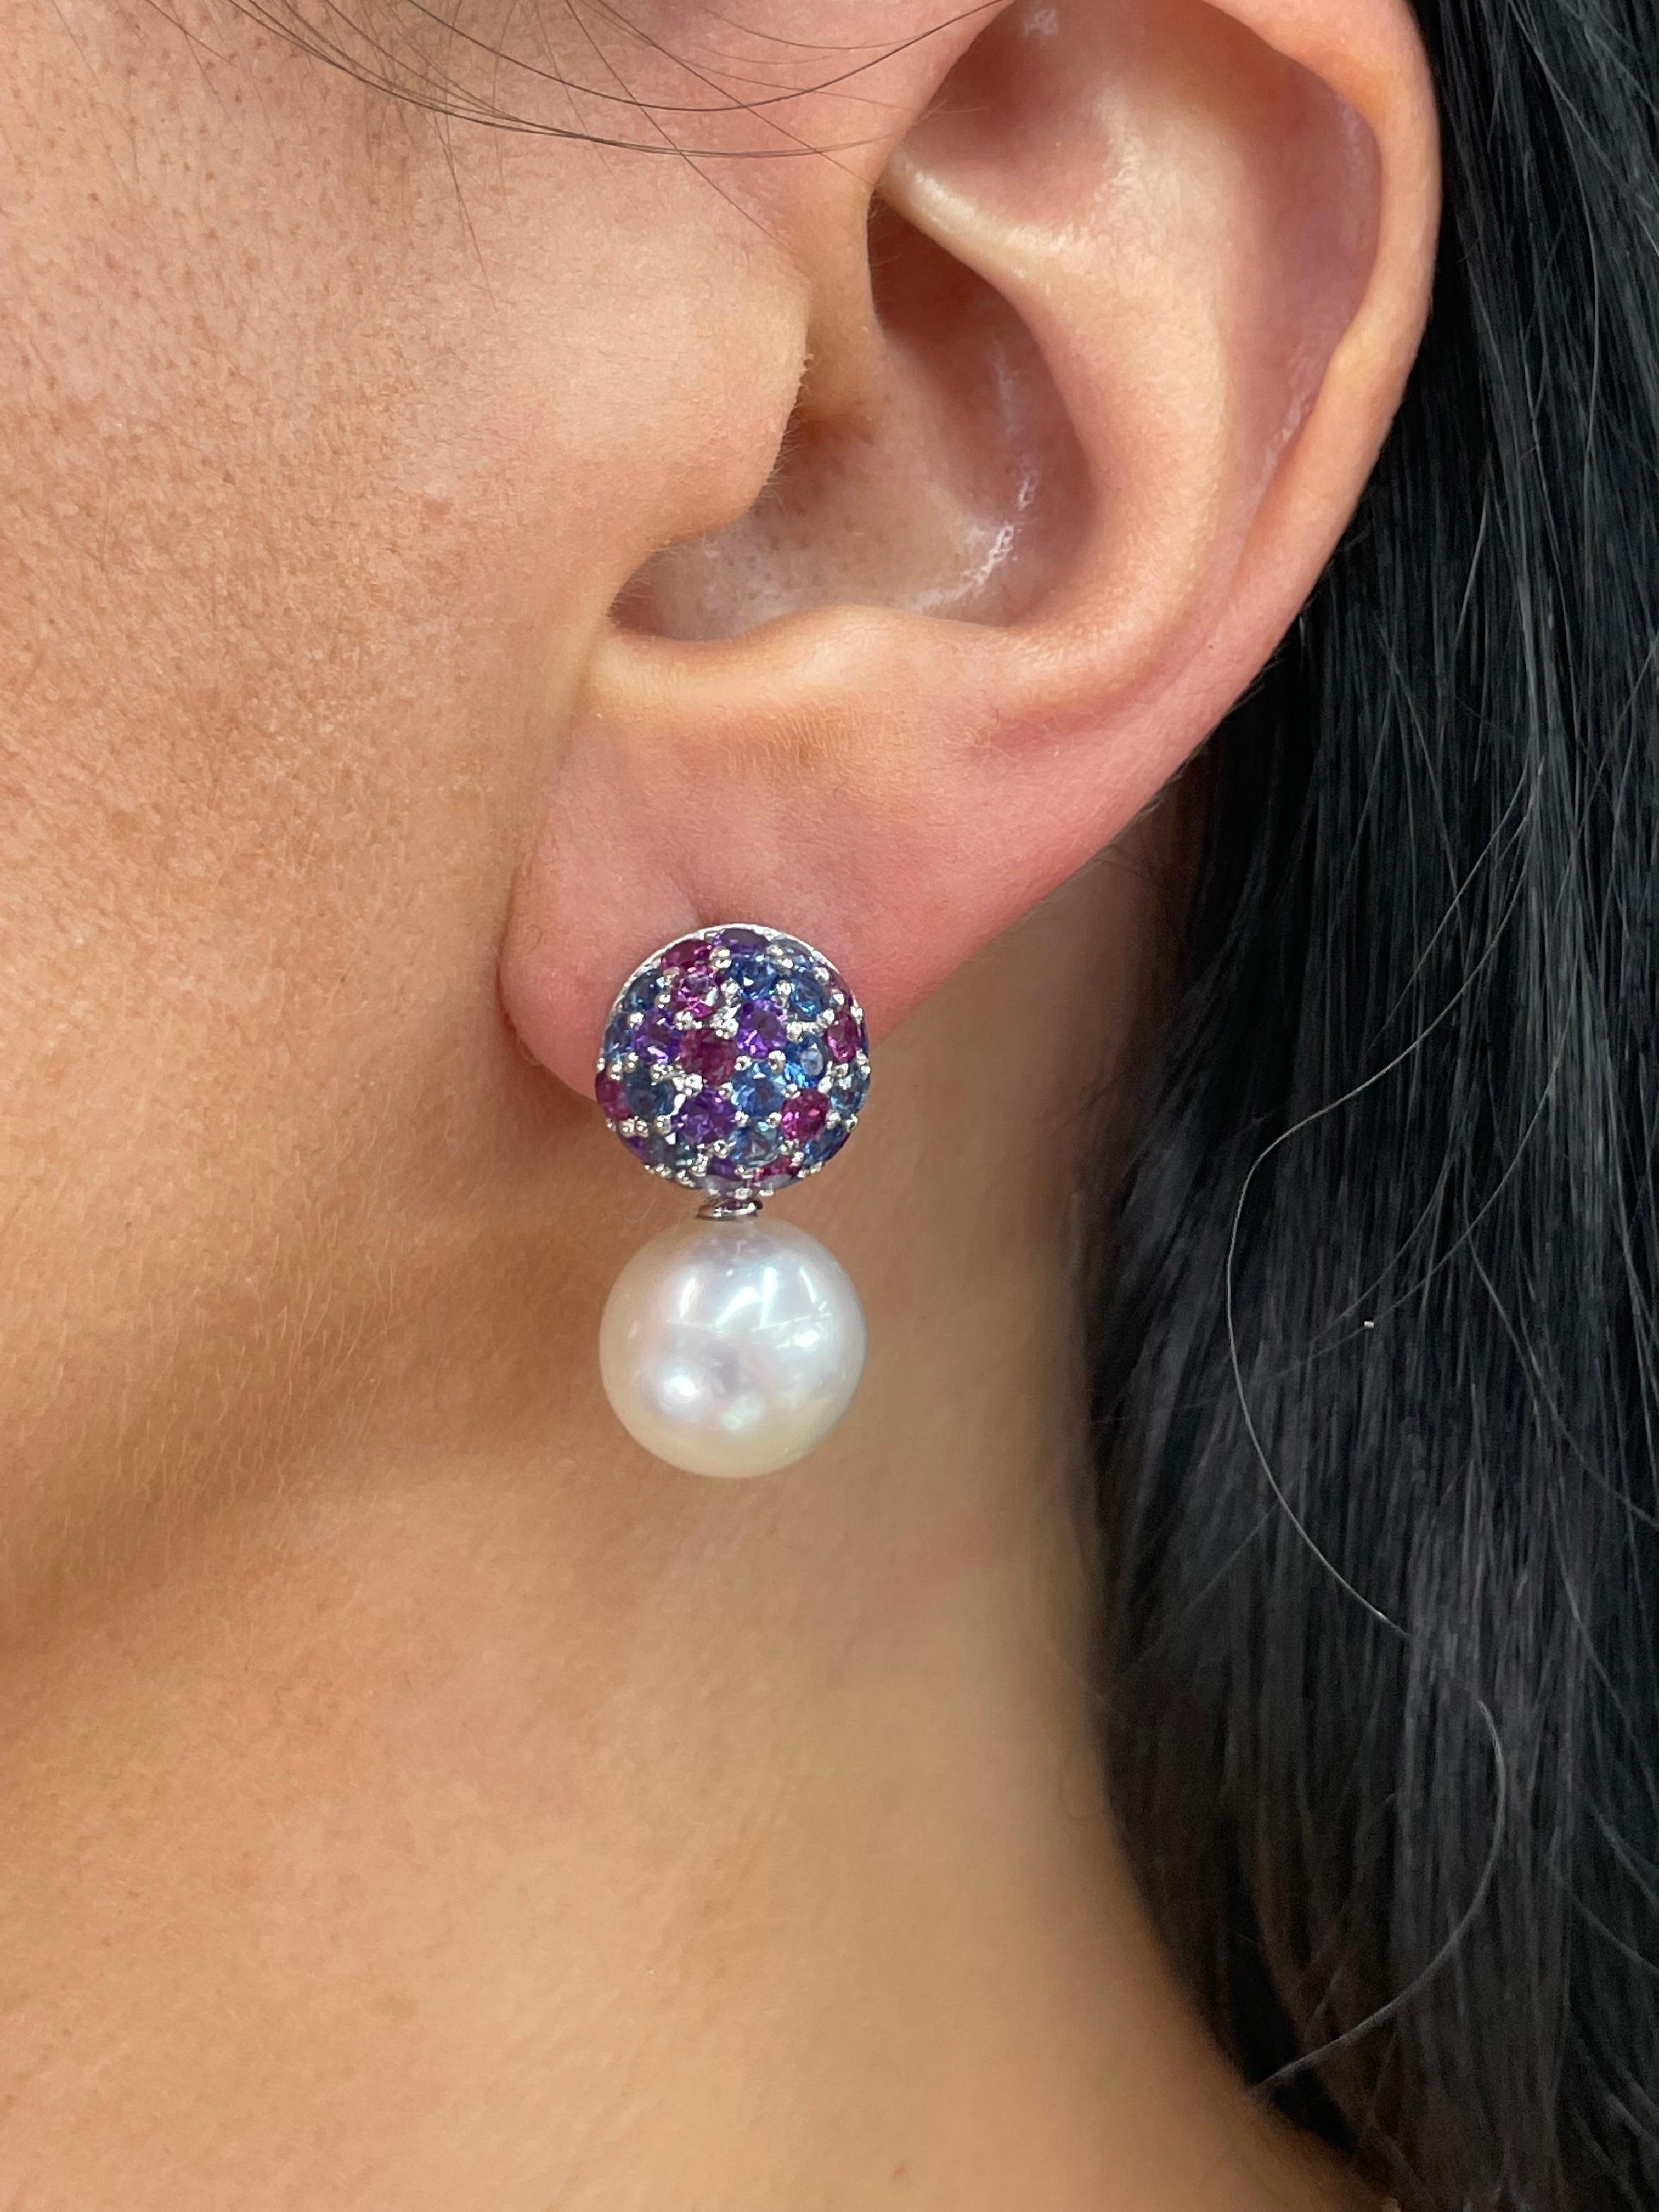 18 Karat White Gold dome drop earrings featuring number Sapphires, 2.20 Carats, Amethyst & Rhodolite weighing 2.80 Carats and two white South Sea Pearls measuring 12-13 MM.

Customize in Golden, Pink Freshwater or Tahitian
DM for more price & more